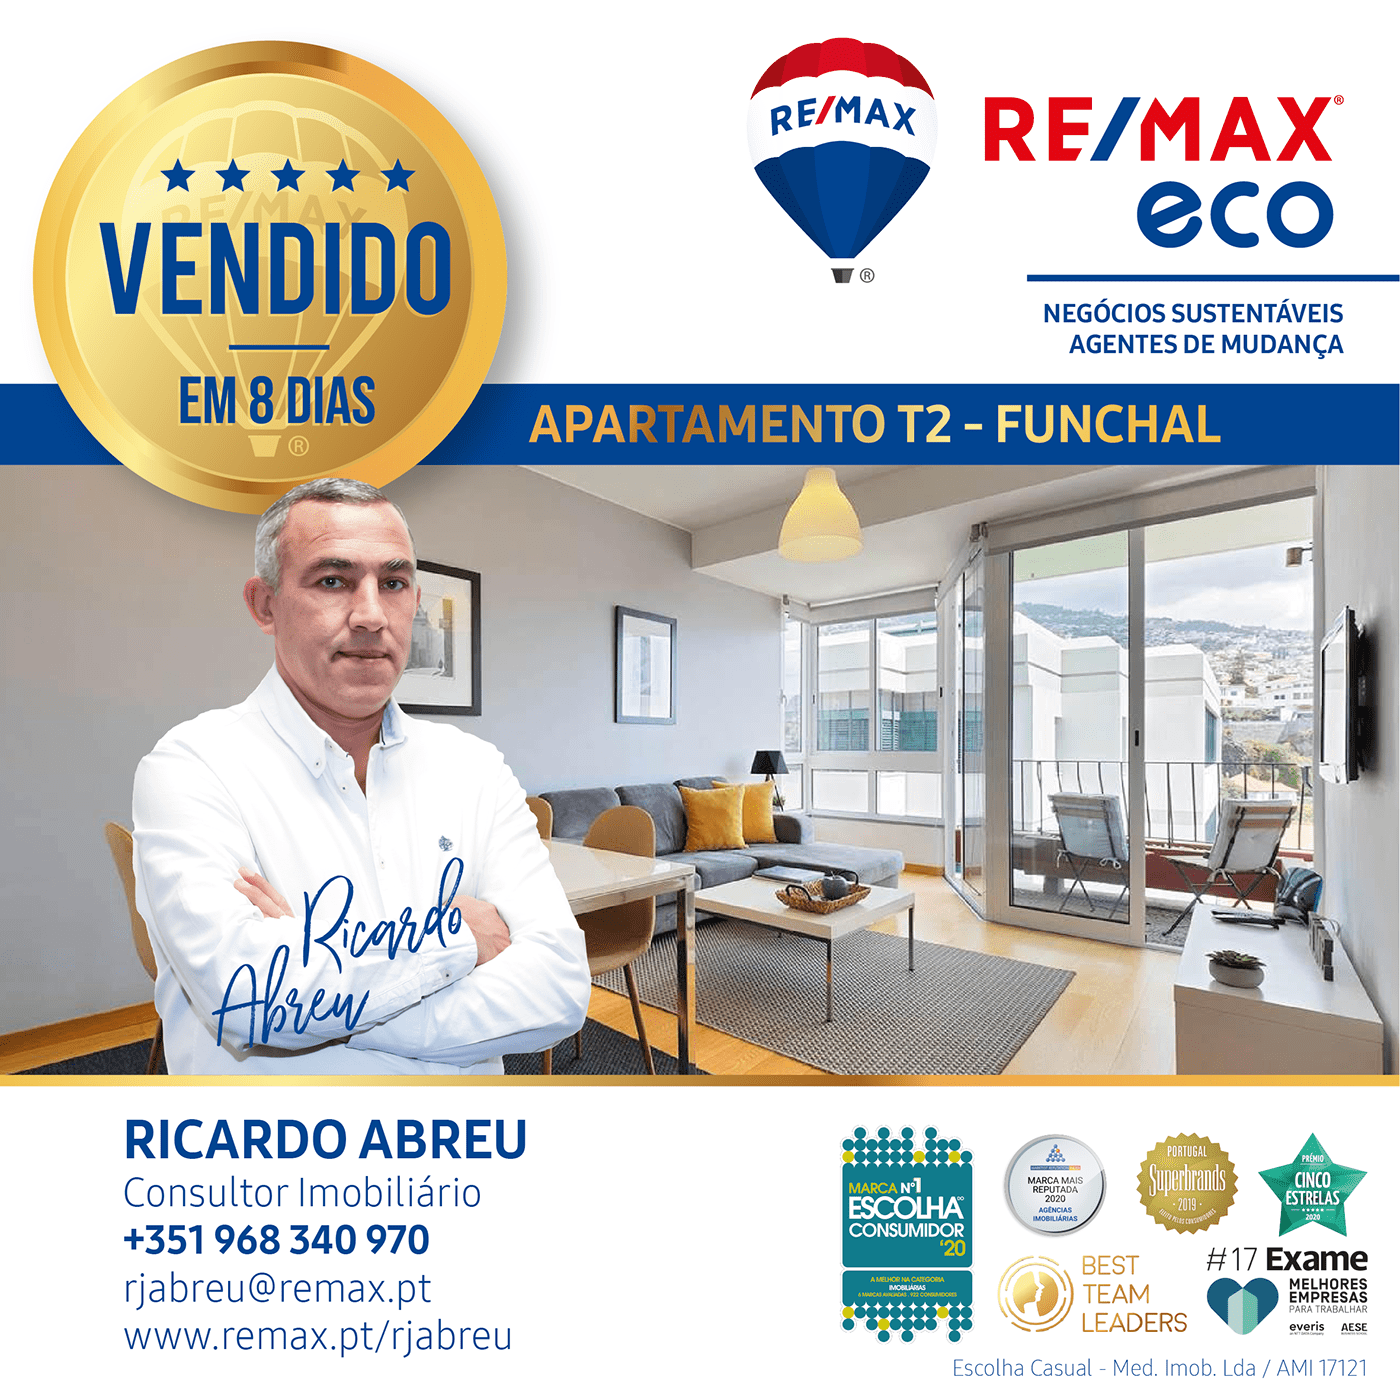 Follow People remax eco